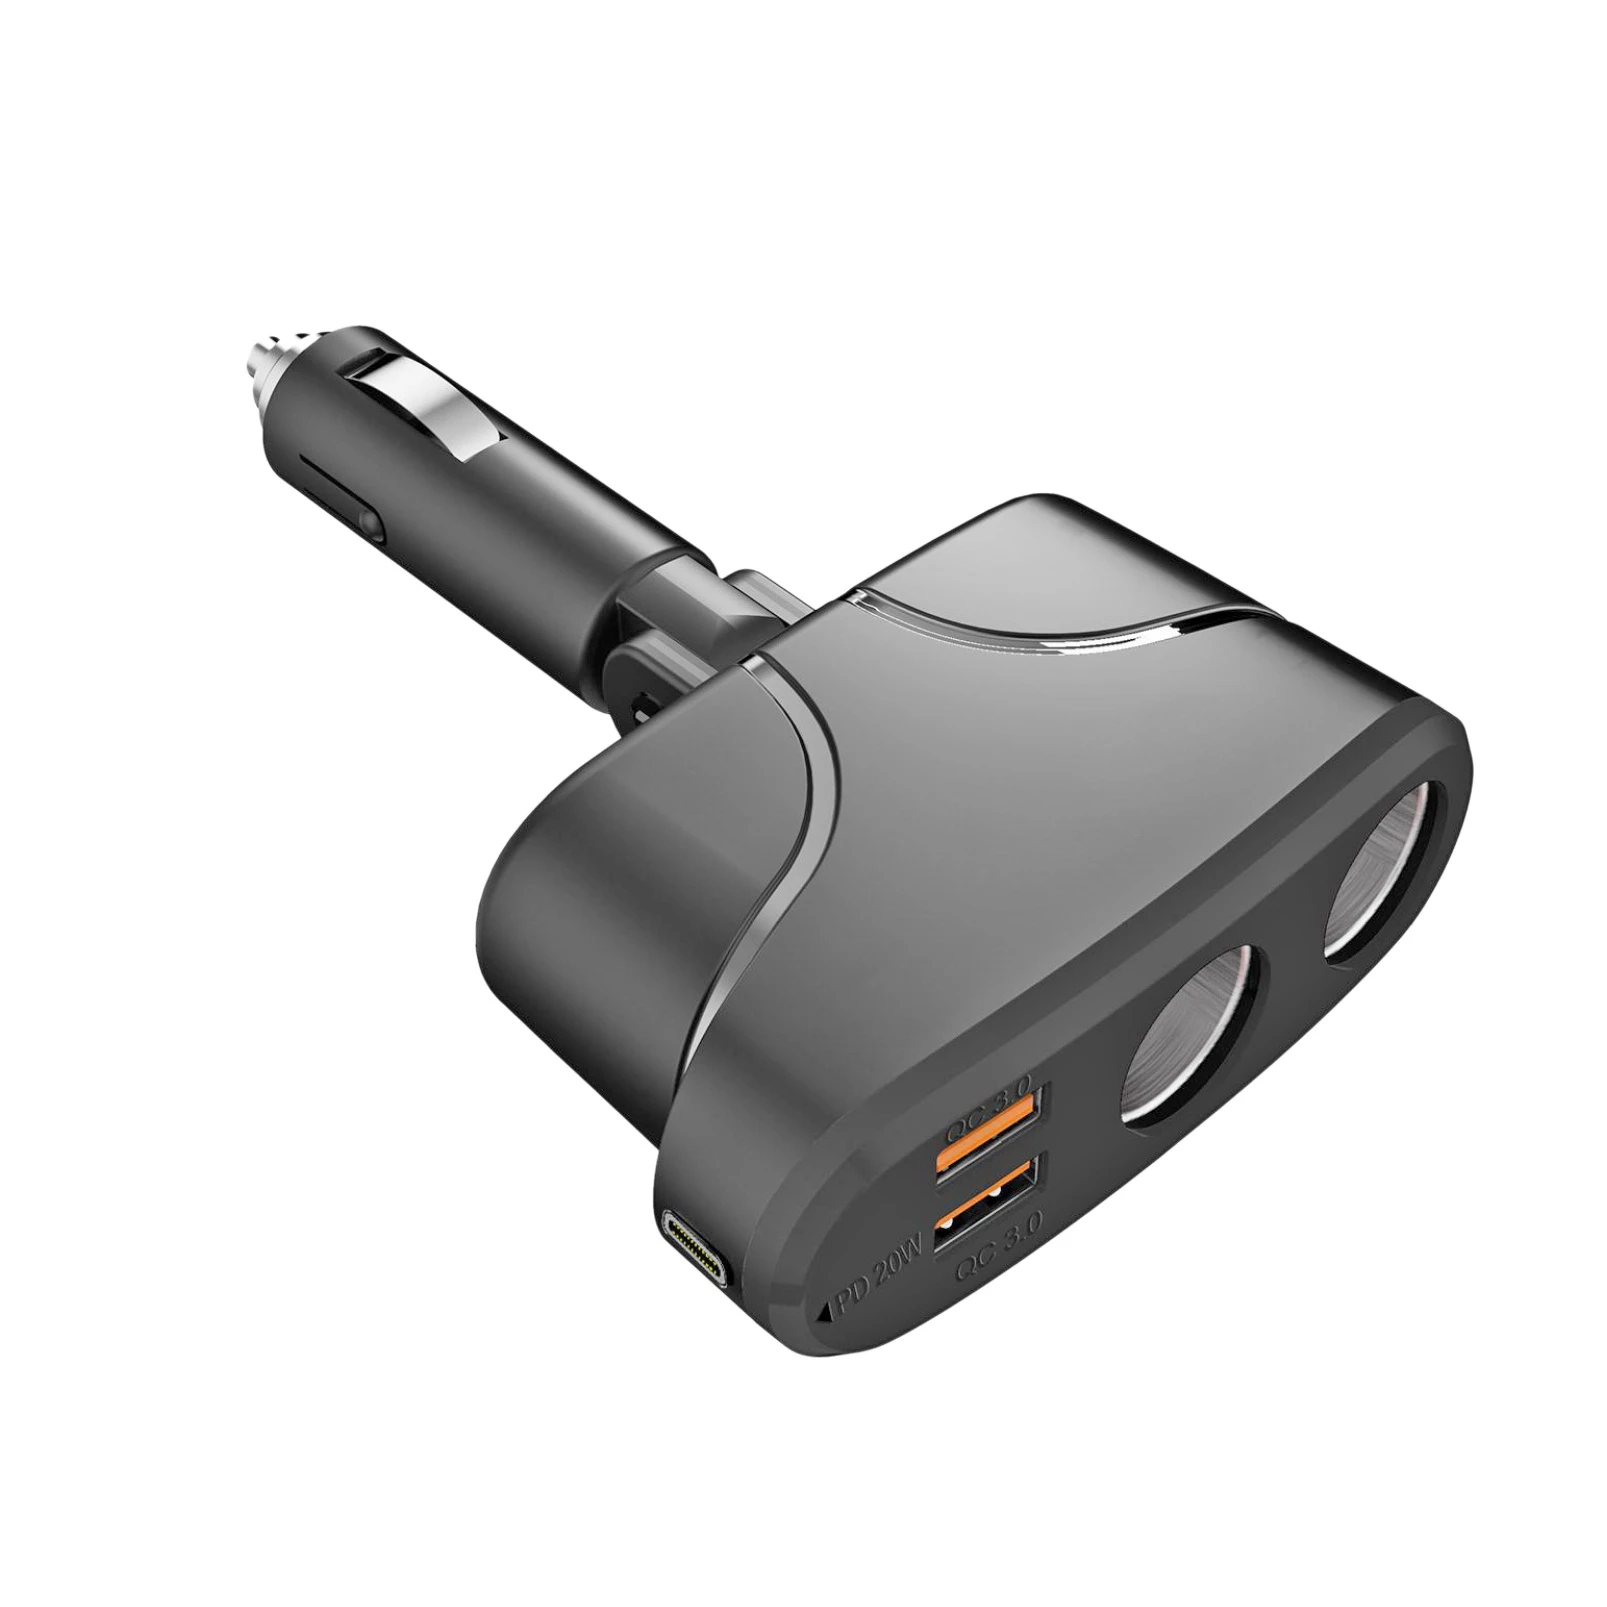 

Car Charger Dual Cigarette-Lighter Splitter Dual QC 3.0 USB Fast Charging Type-C Ports Socket Adapter for Phone DashCam